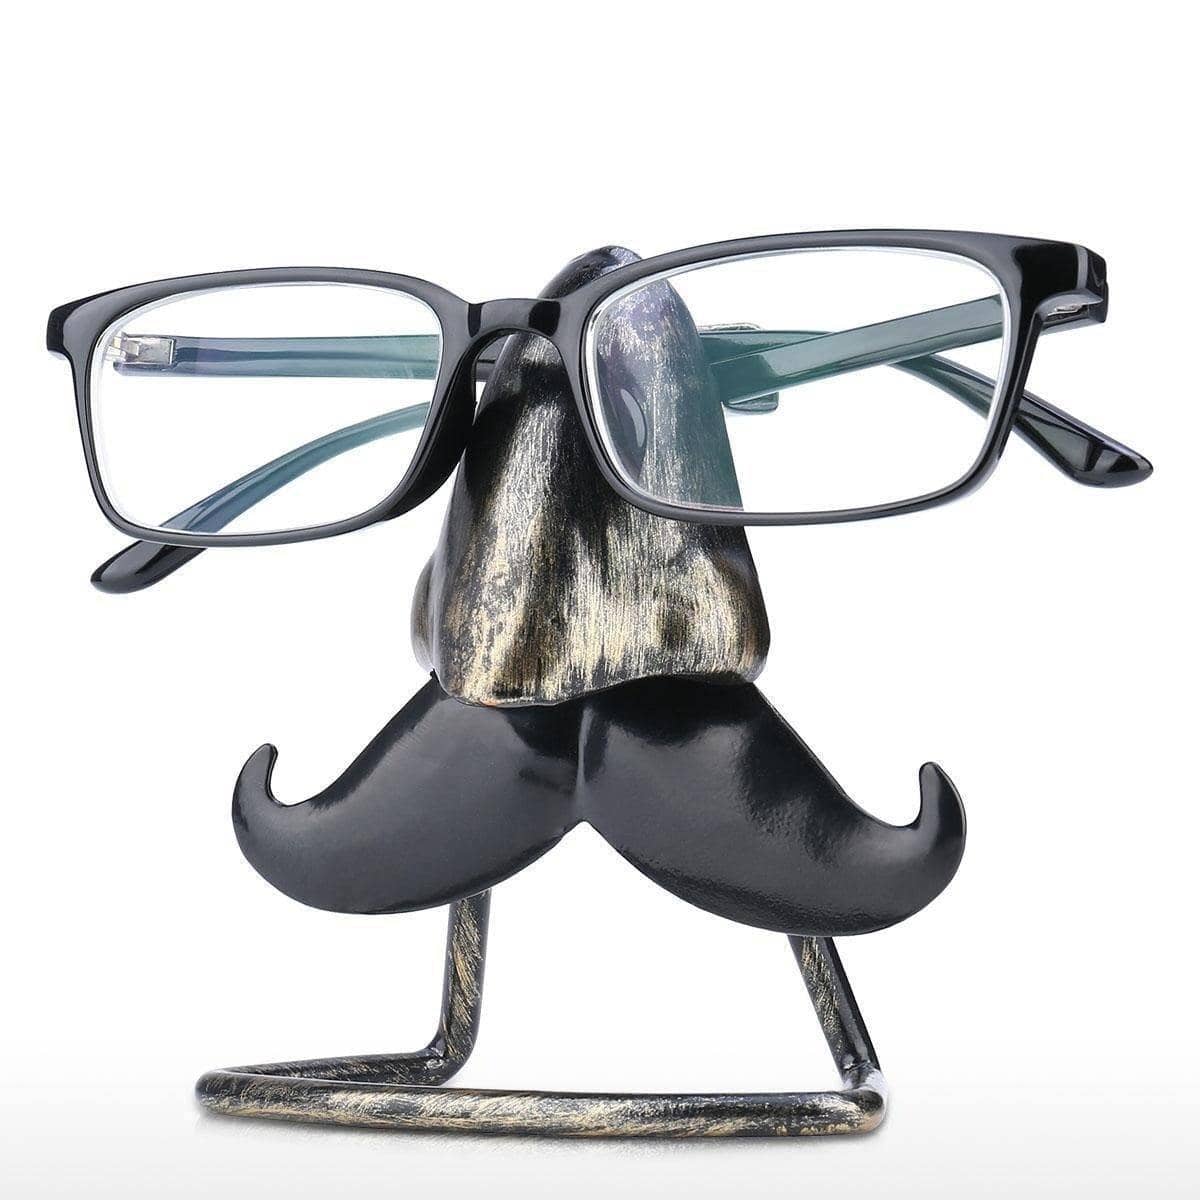 Big Nose & Beard Glasses Holder - Quirky and Practical Decor